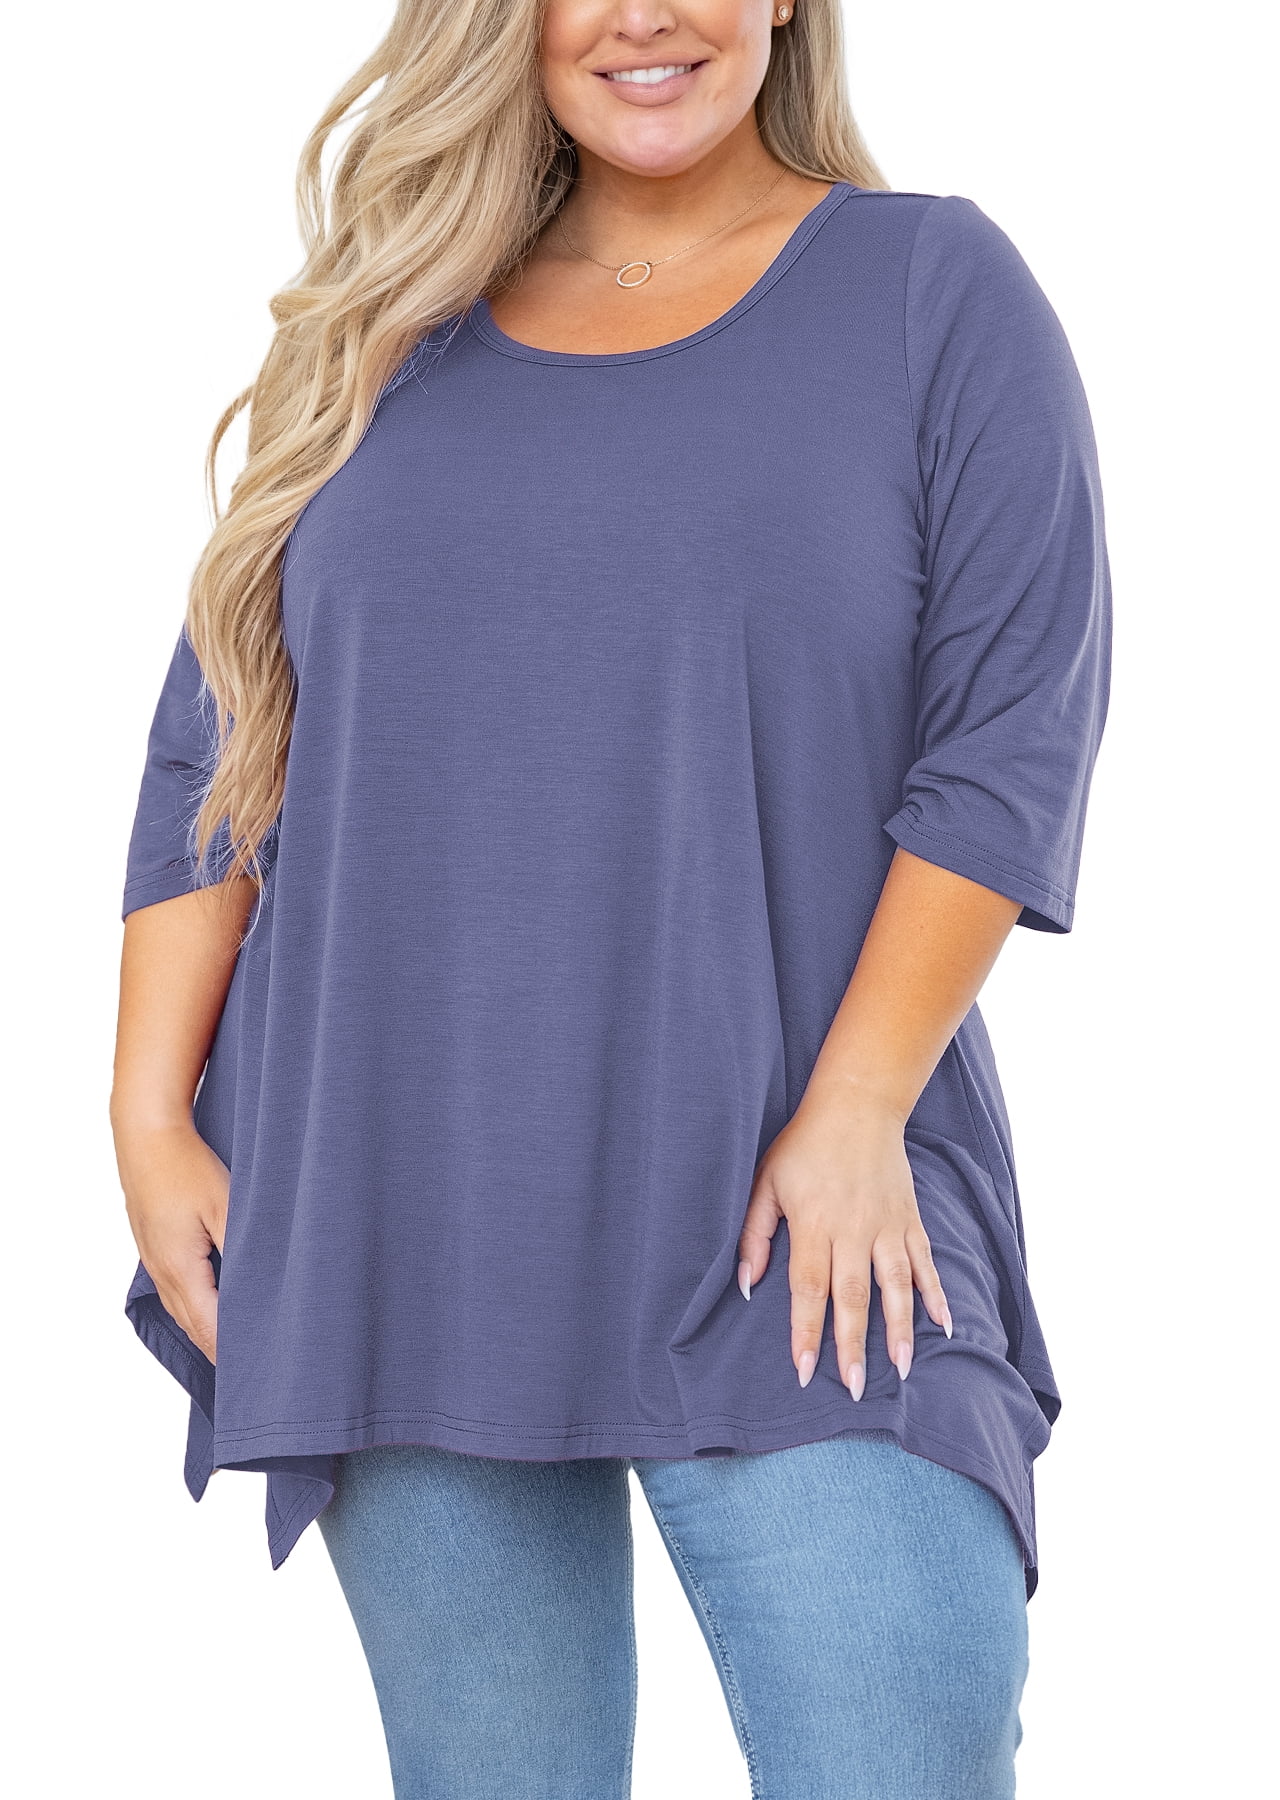 LARACE Stylish Plus Size Tunics for Women - Comfortable and Flattering Long  Shirts with Various Colors and Patterns Available 6-Khaki 3X 